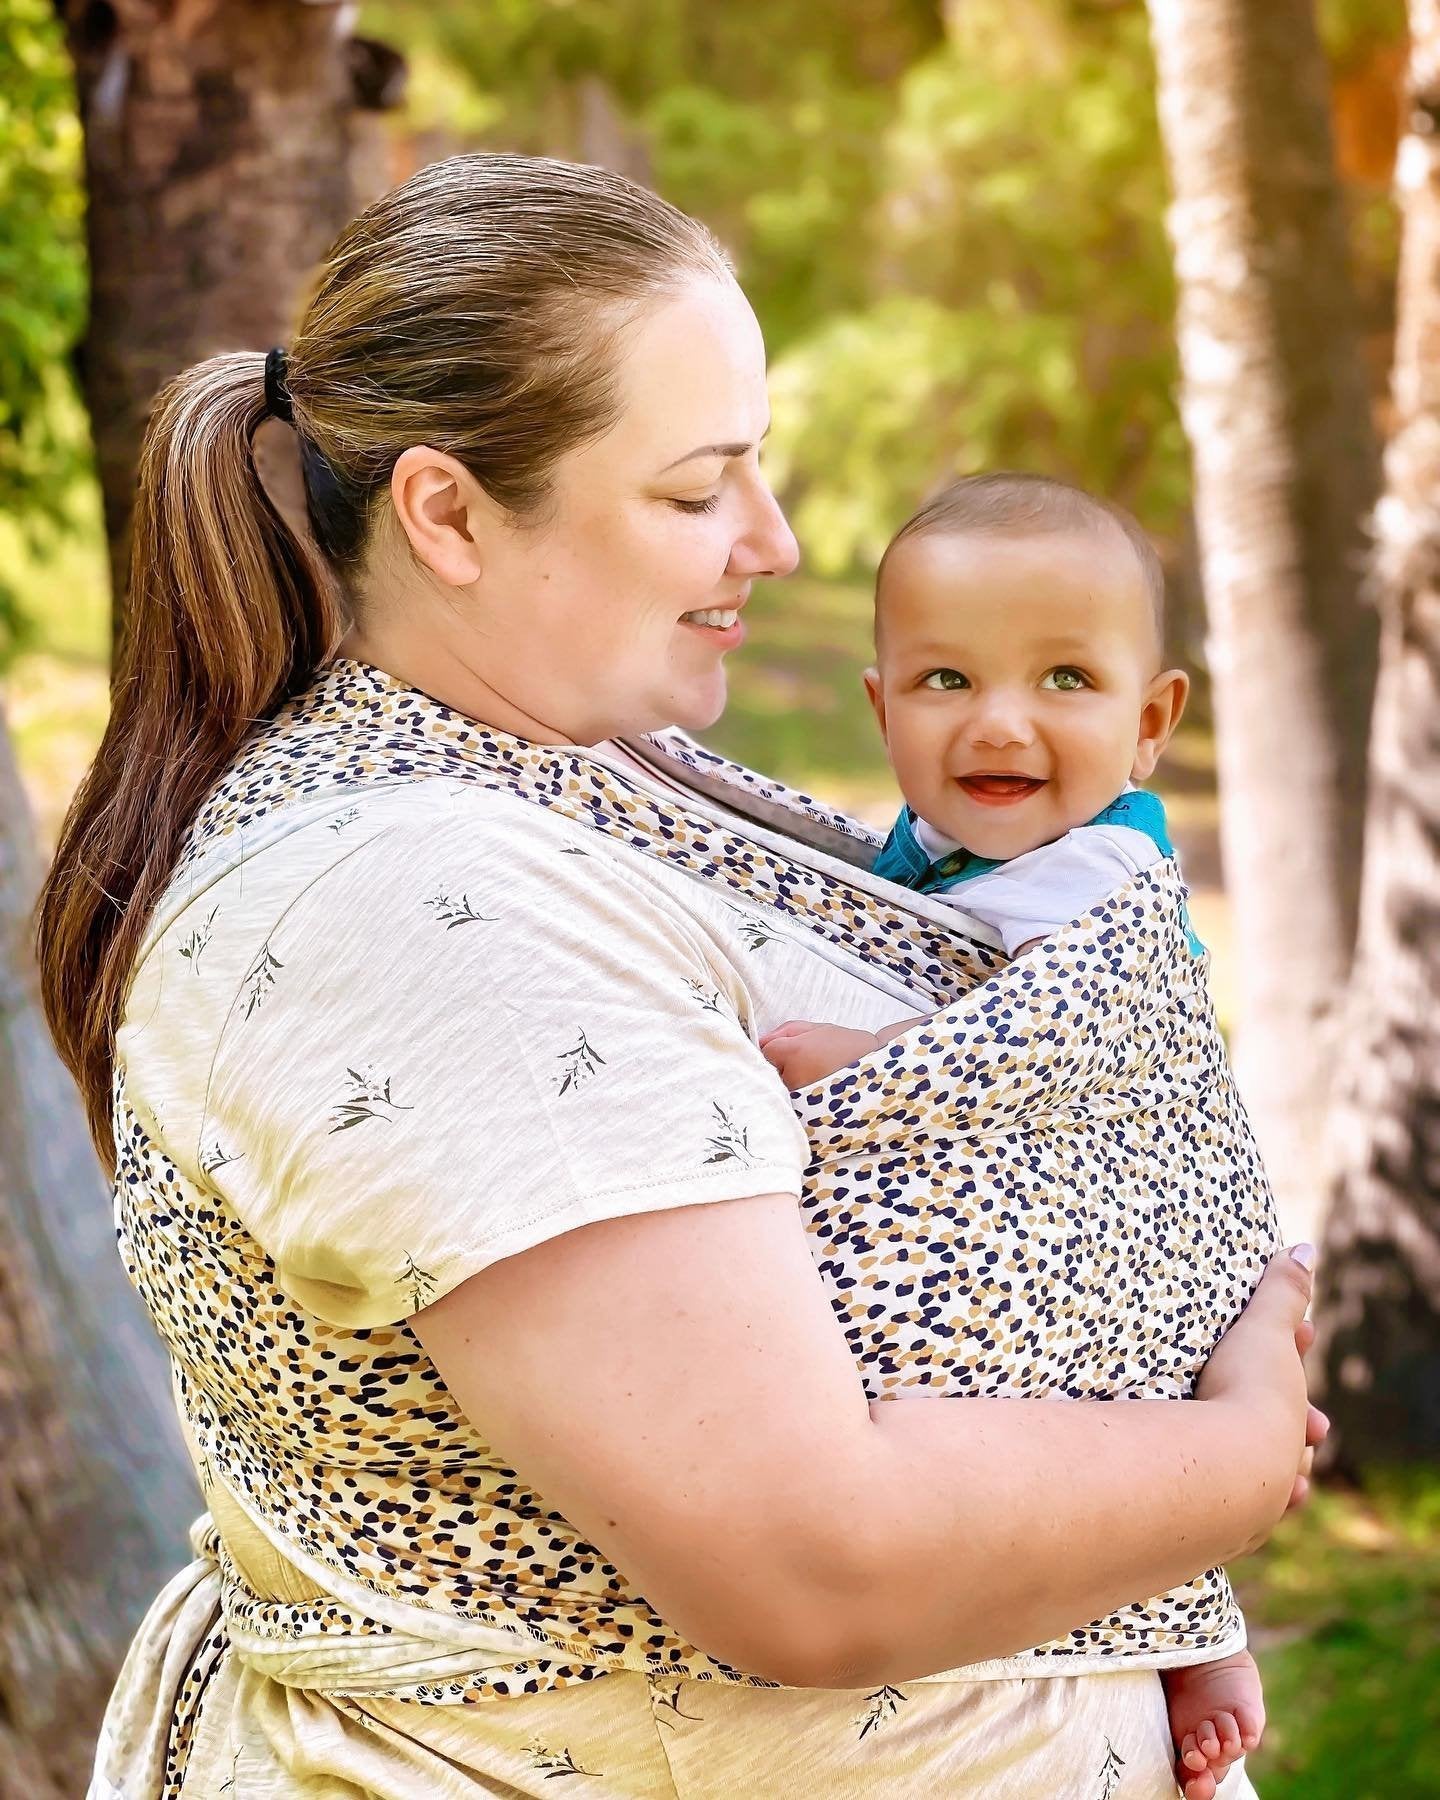 Plus-Size Mom Wearing Baby in Wrap with Tie Secured Around Back